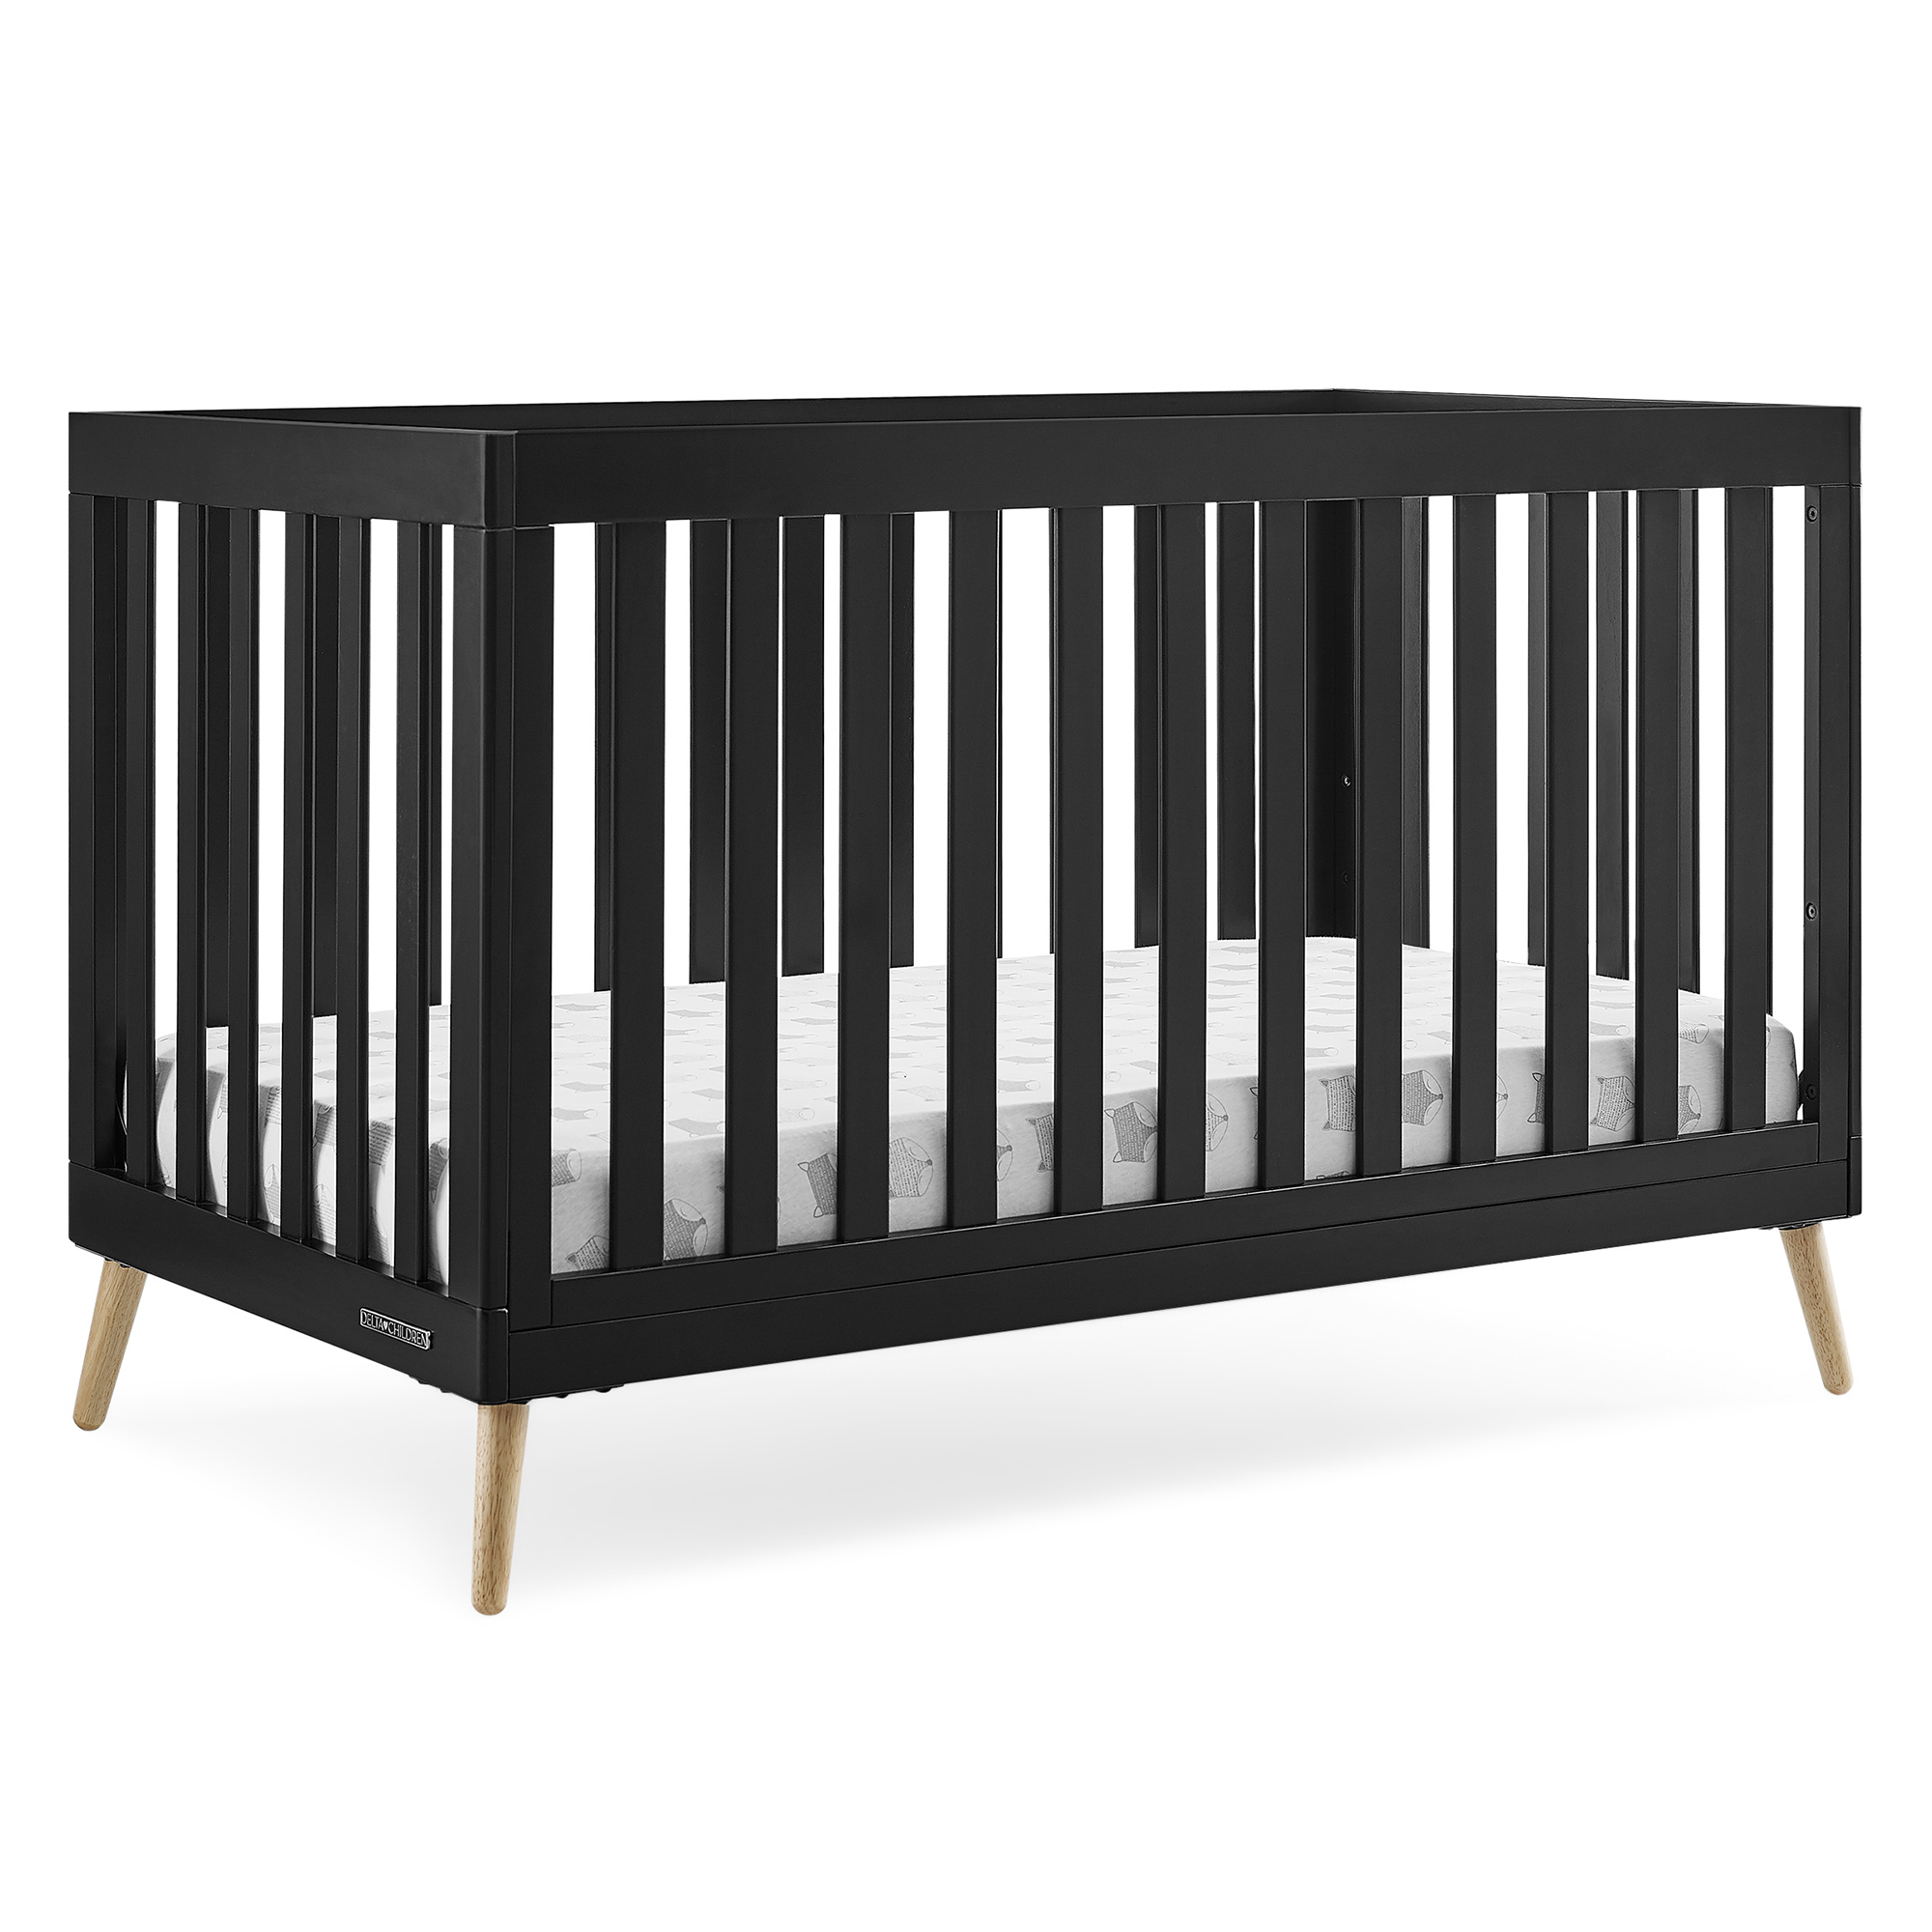 Delta Children Essex 4-in-1 Convertible Baby Crib - Greenguard Gold Certified, Ebony/Natural - image 1 of 11